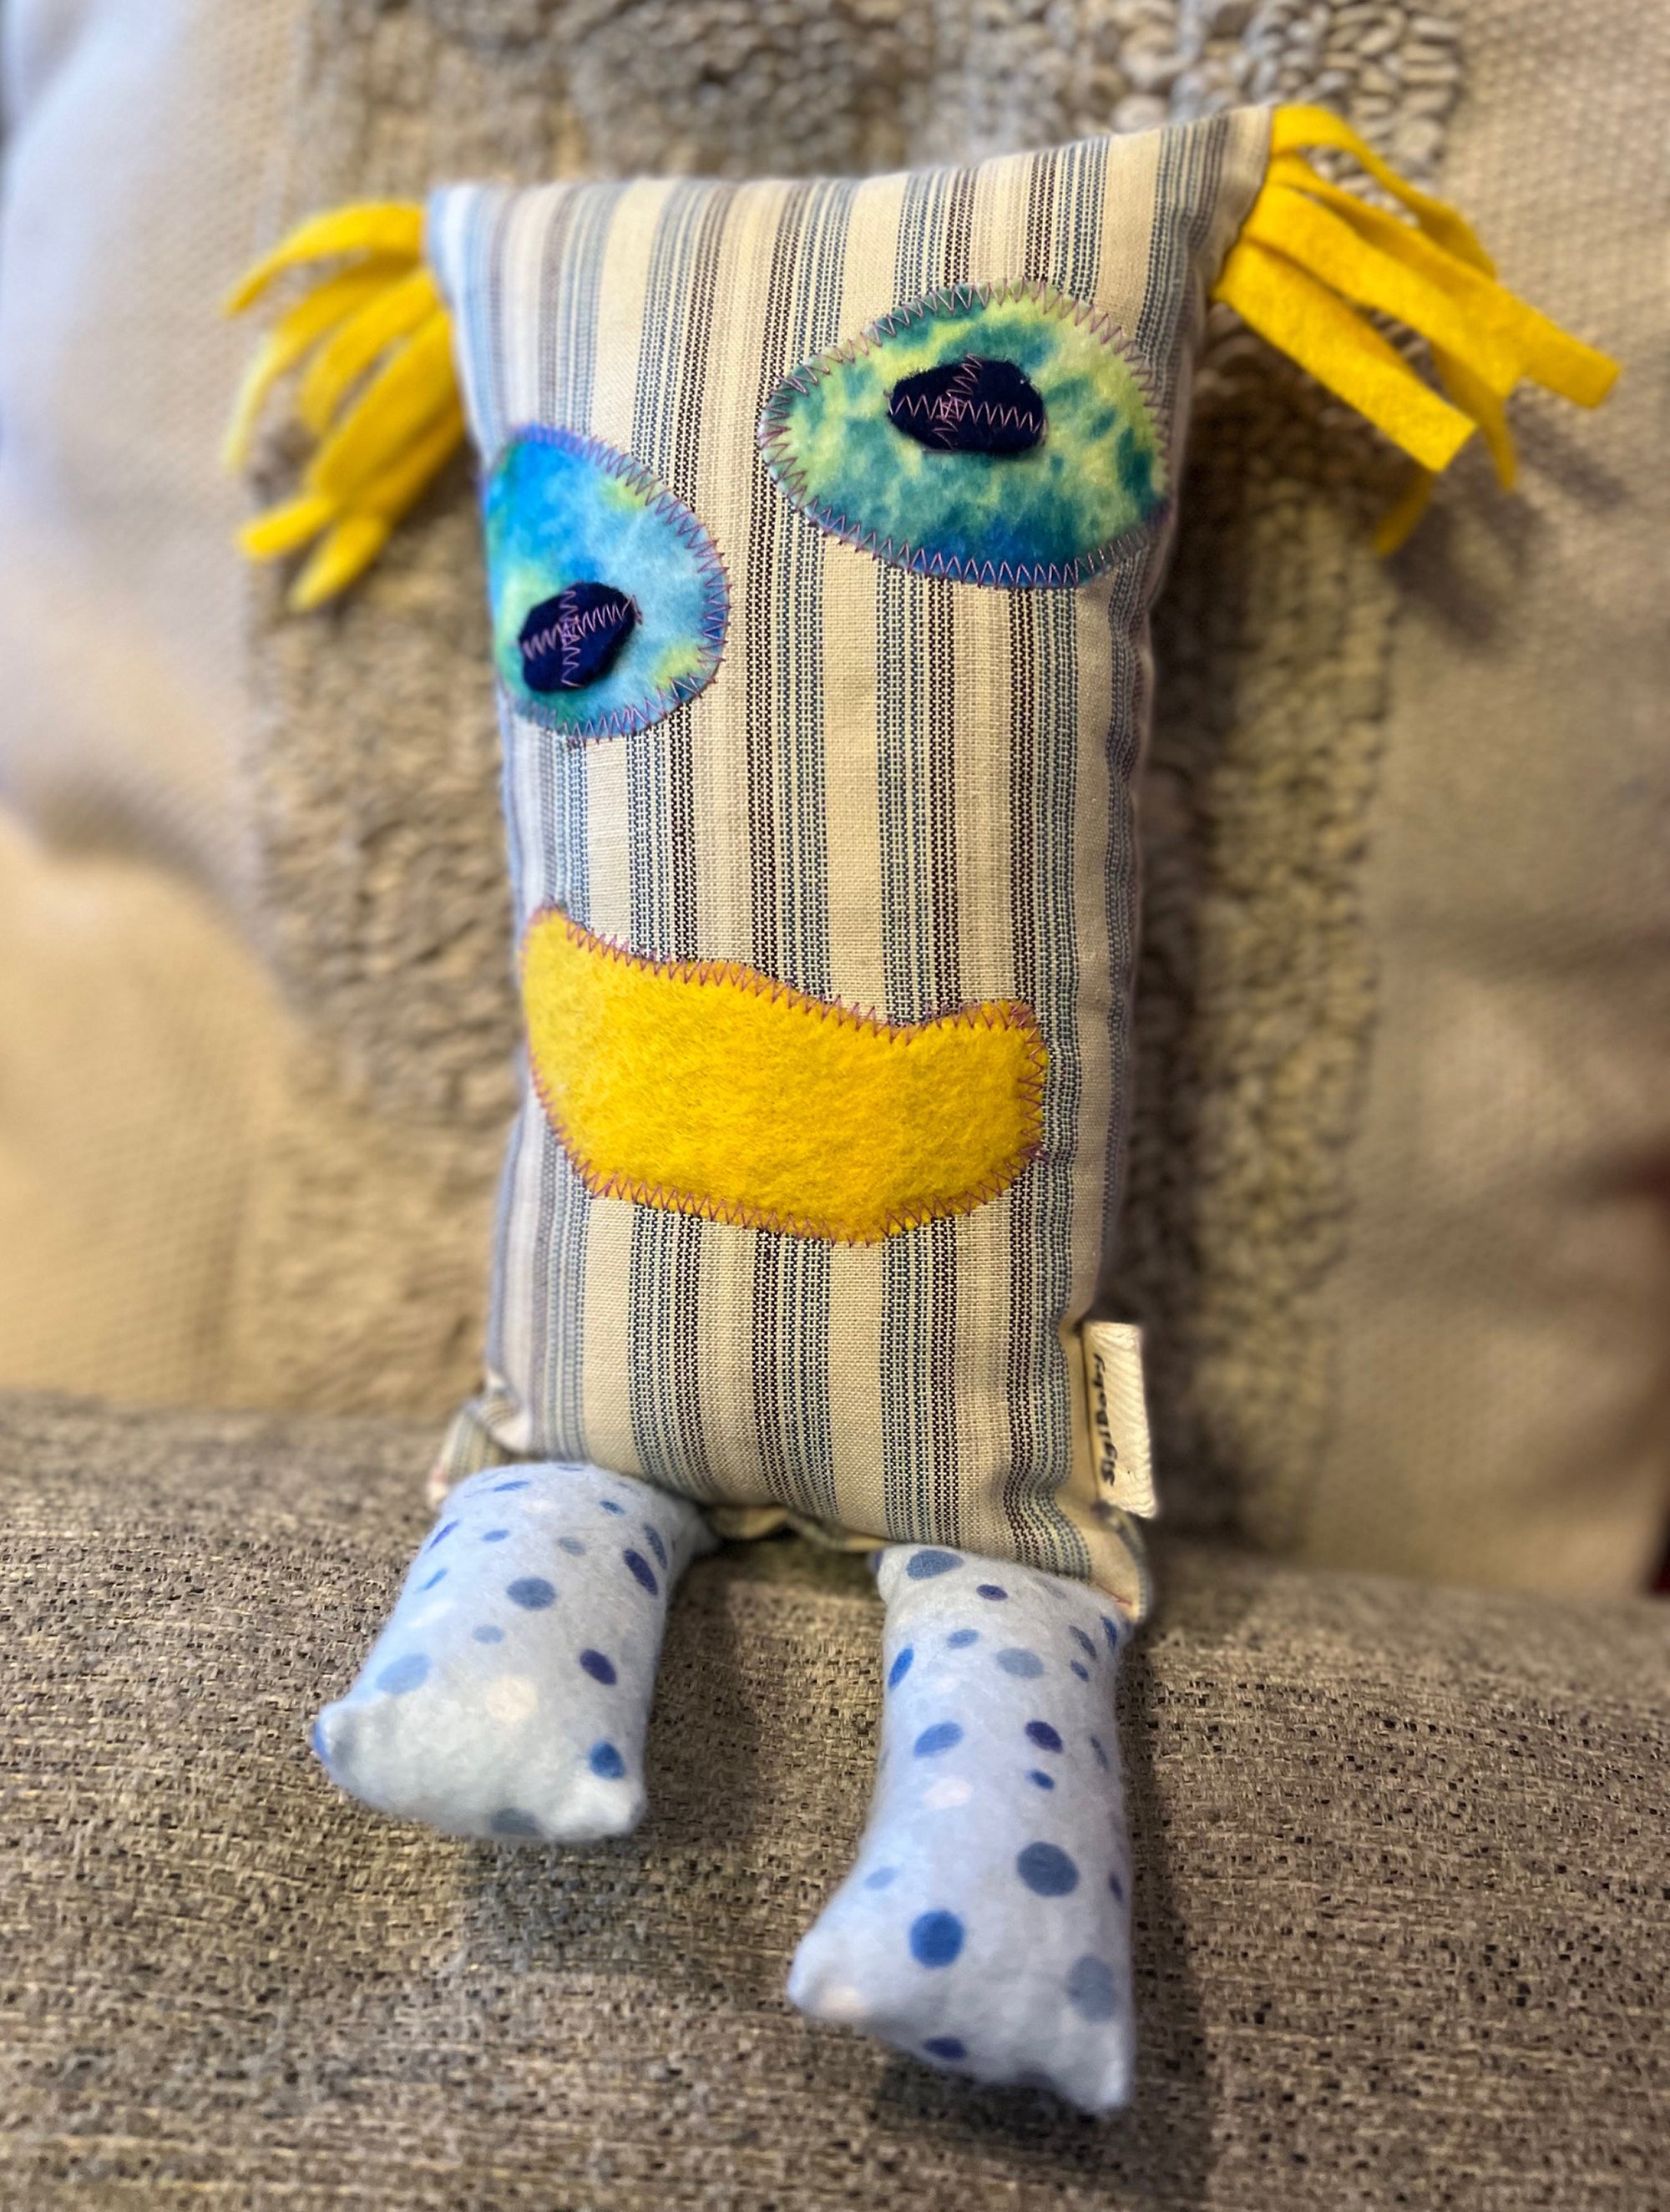 Little Monster "Fritz" Handmade Recycled Fabric Plush Toy Doll